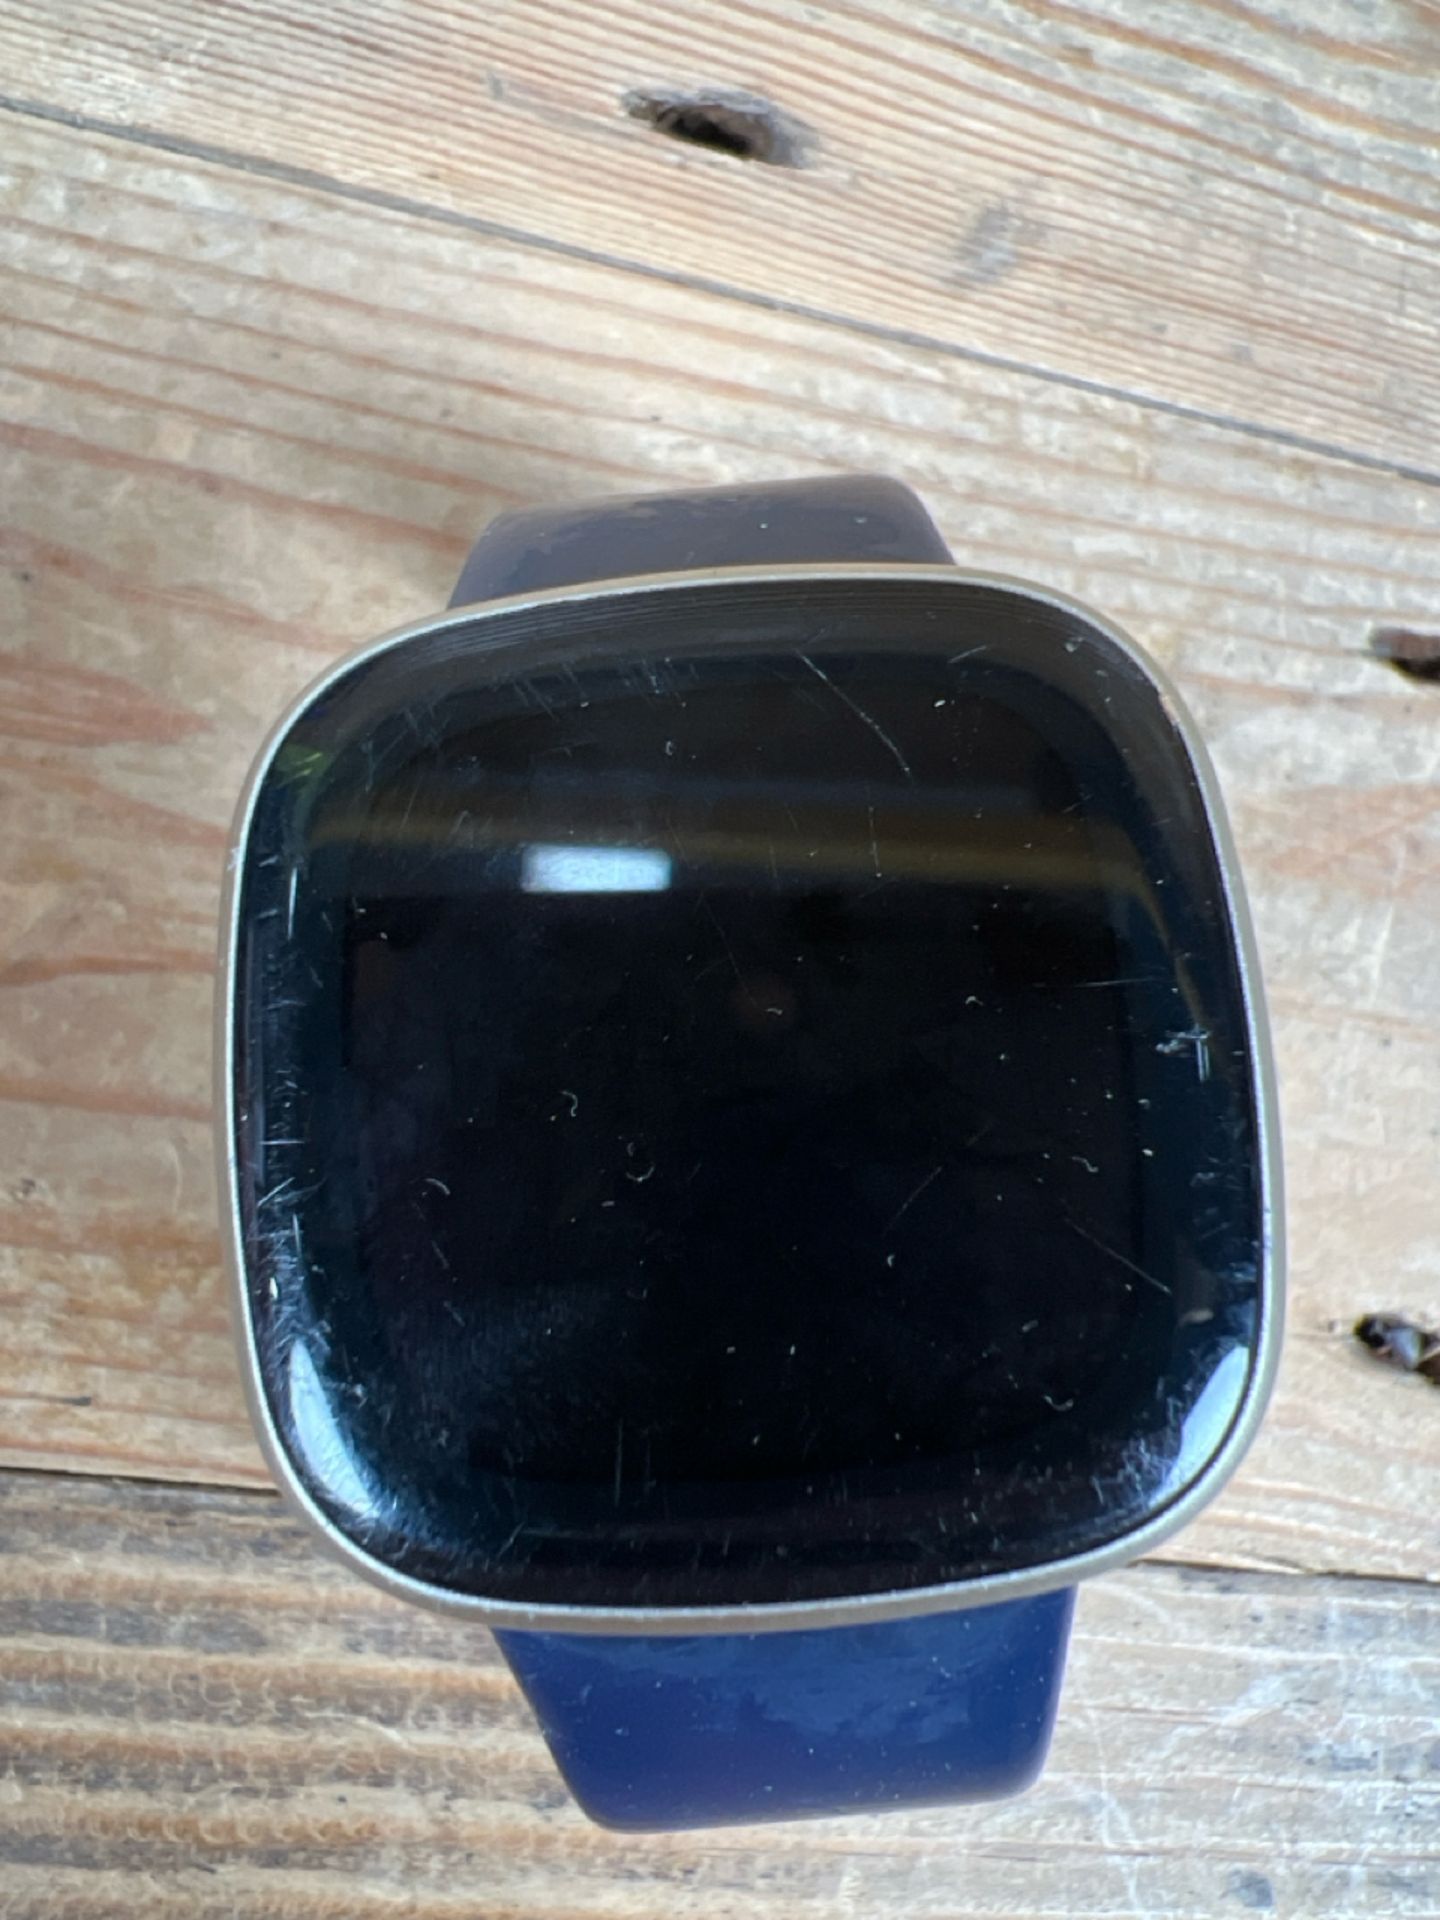 Fitbit Versa 3 Soft Gold With Midnight Blue Band - Image 2 of 4